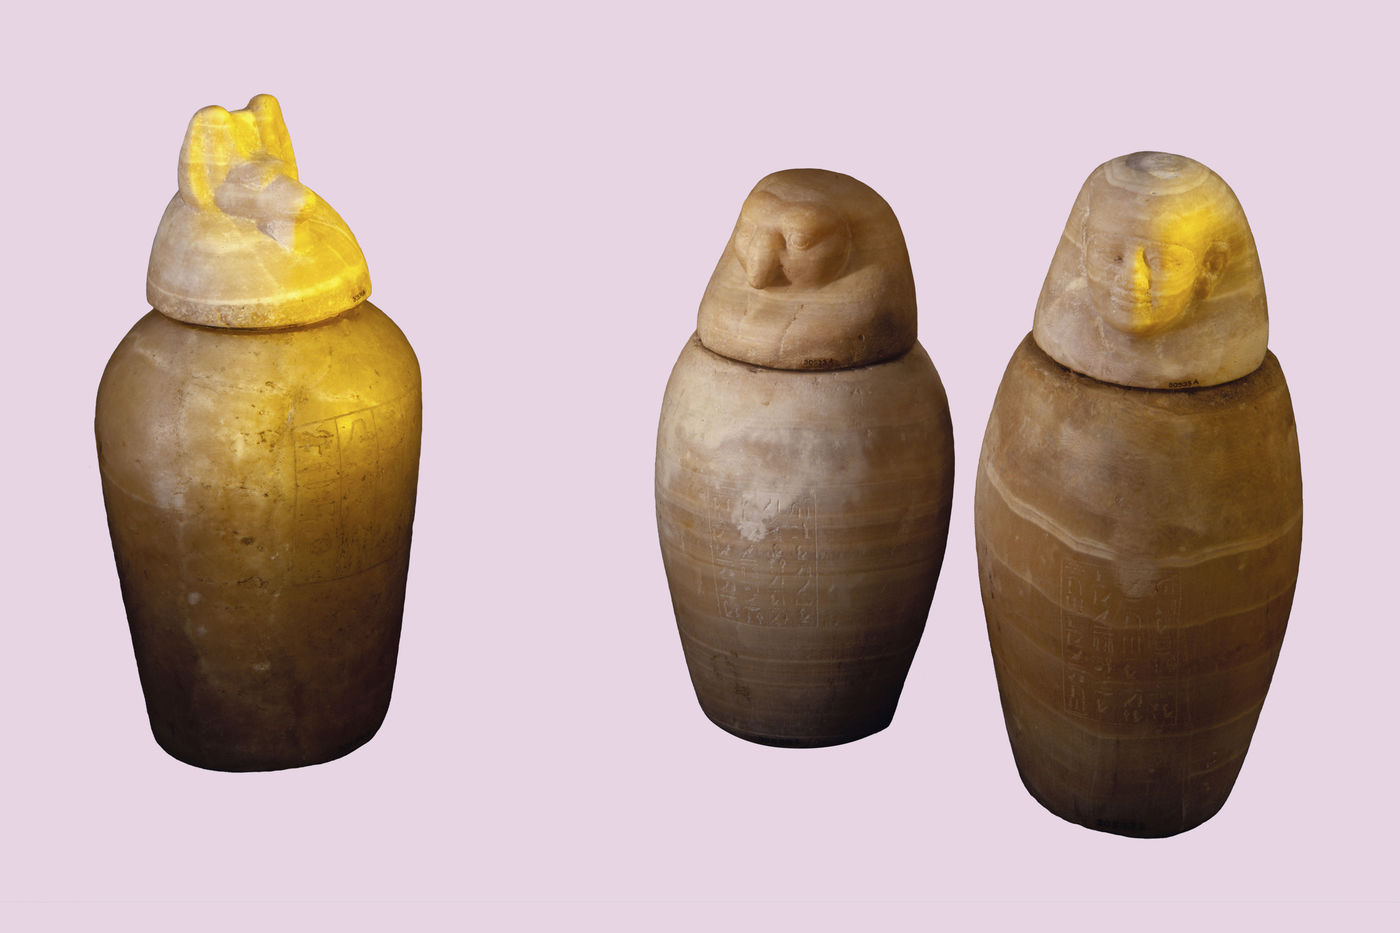 Canopic jars were used to preserve the delicate organs removed from dead bodies during the mummification process.